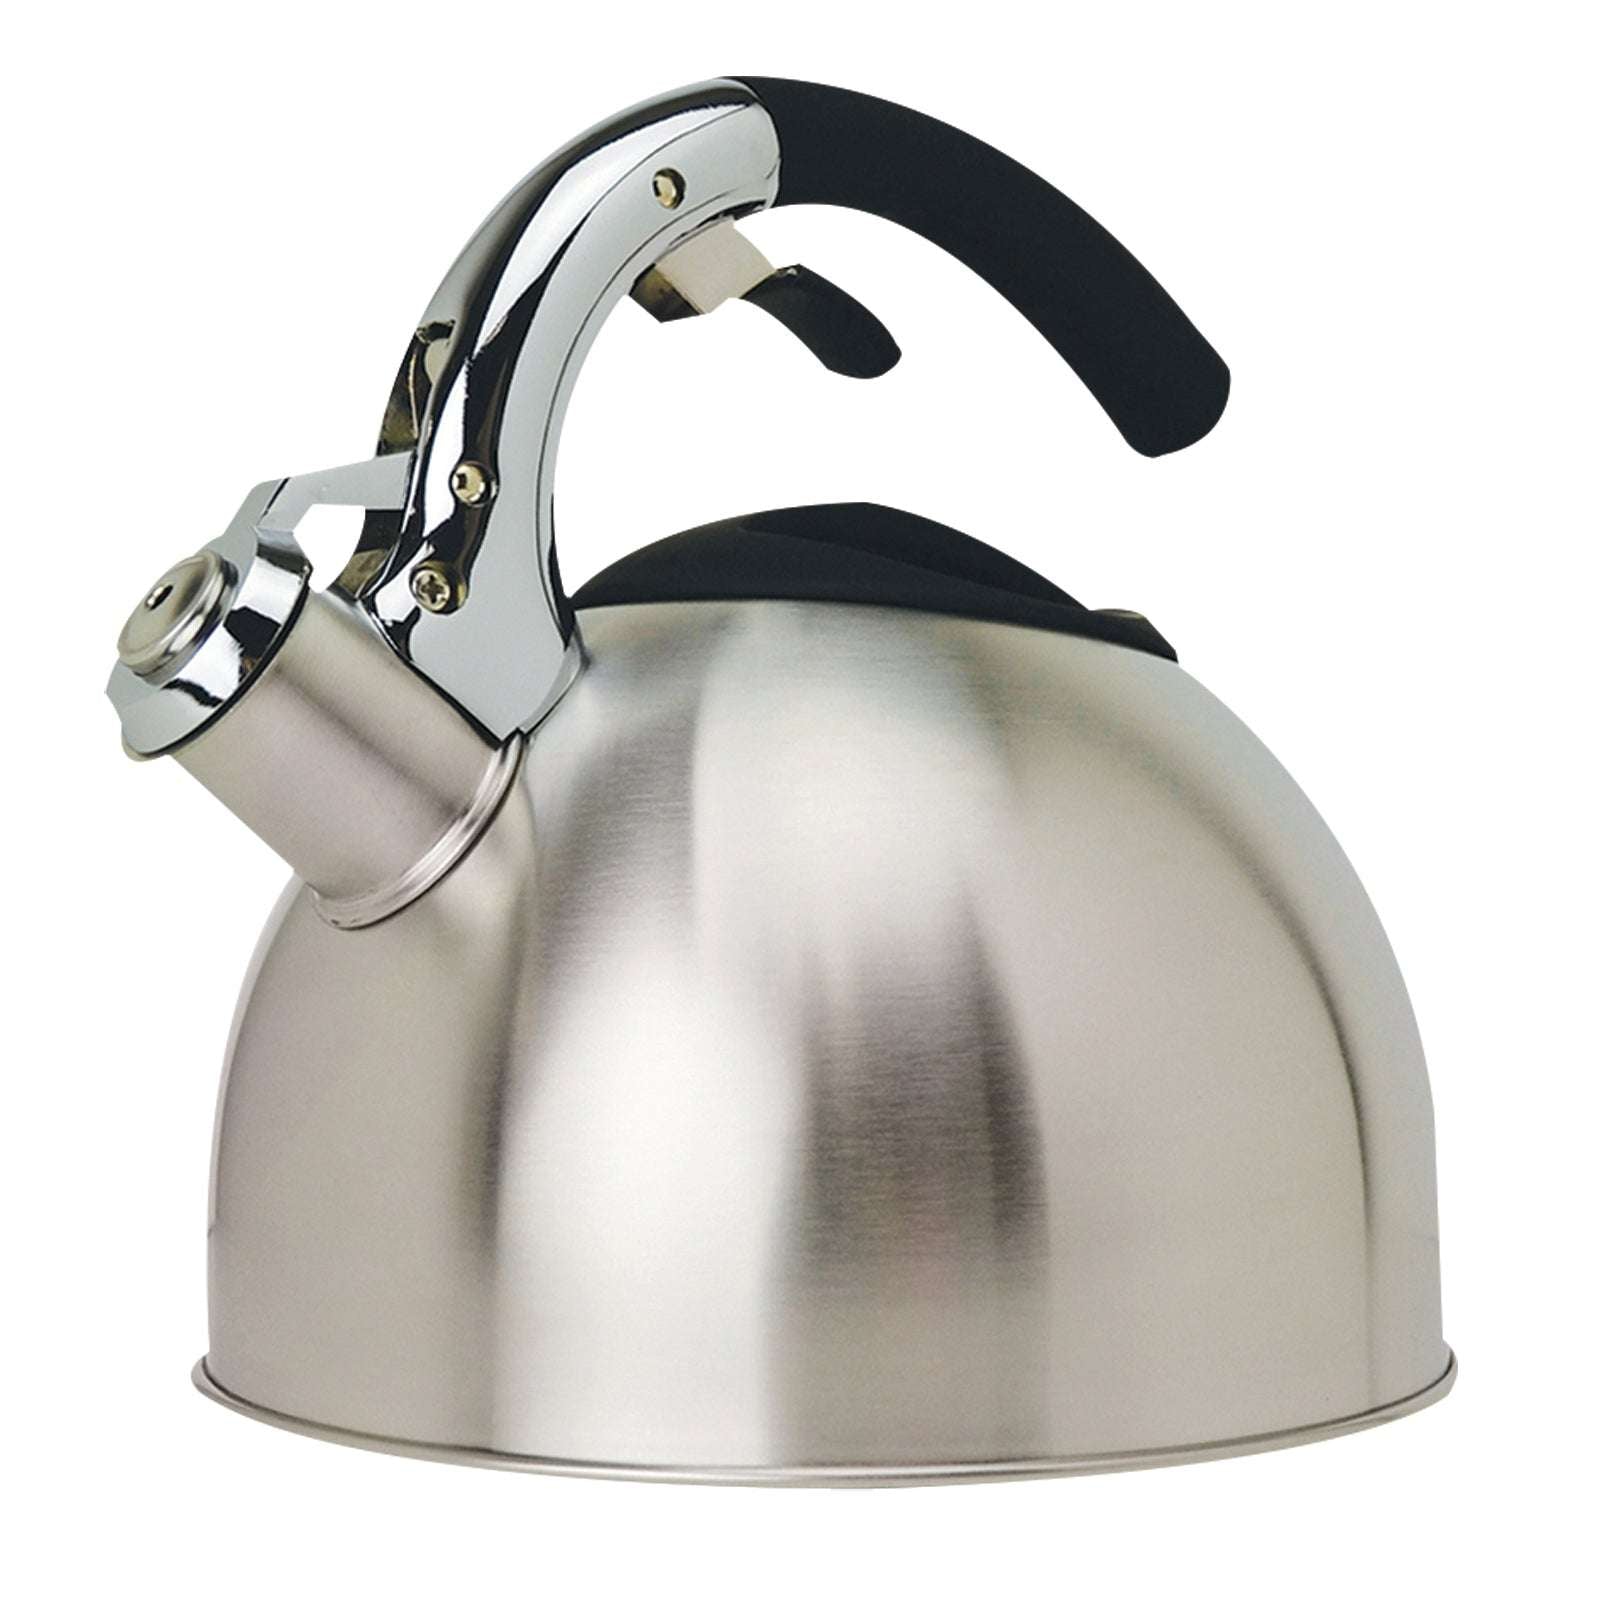 Whistling Stovetop Tea Kettle Food Grade Stainless Steel Hot Water